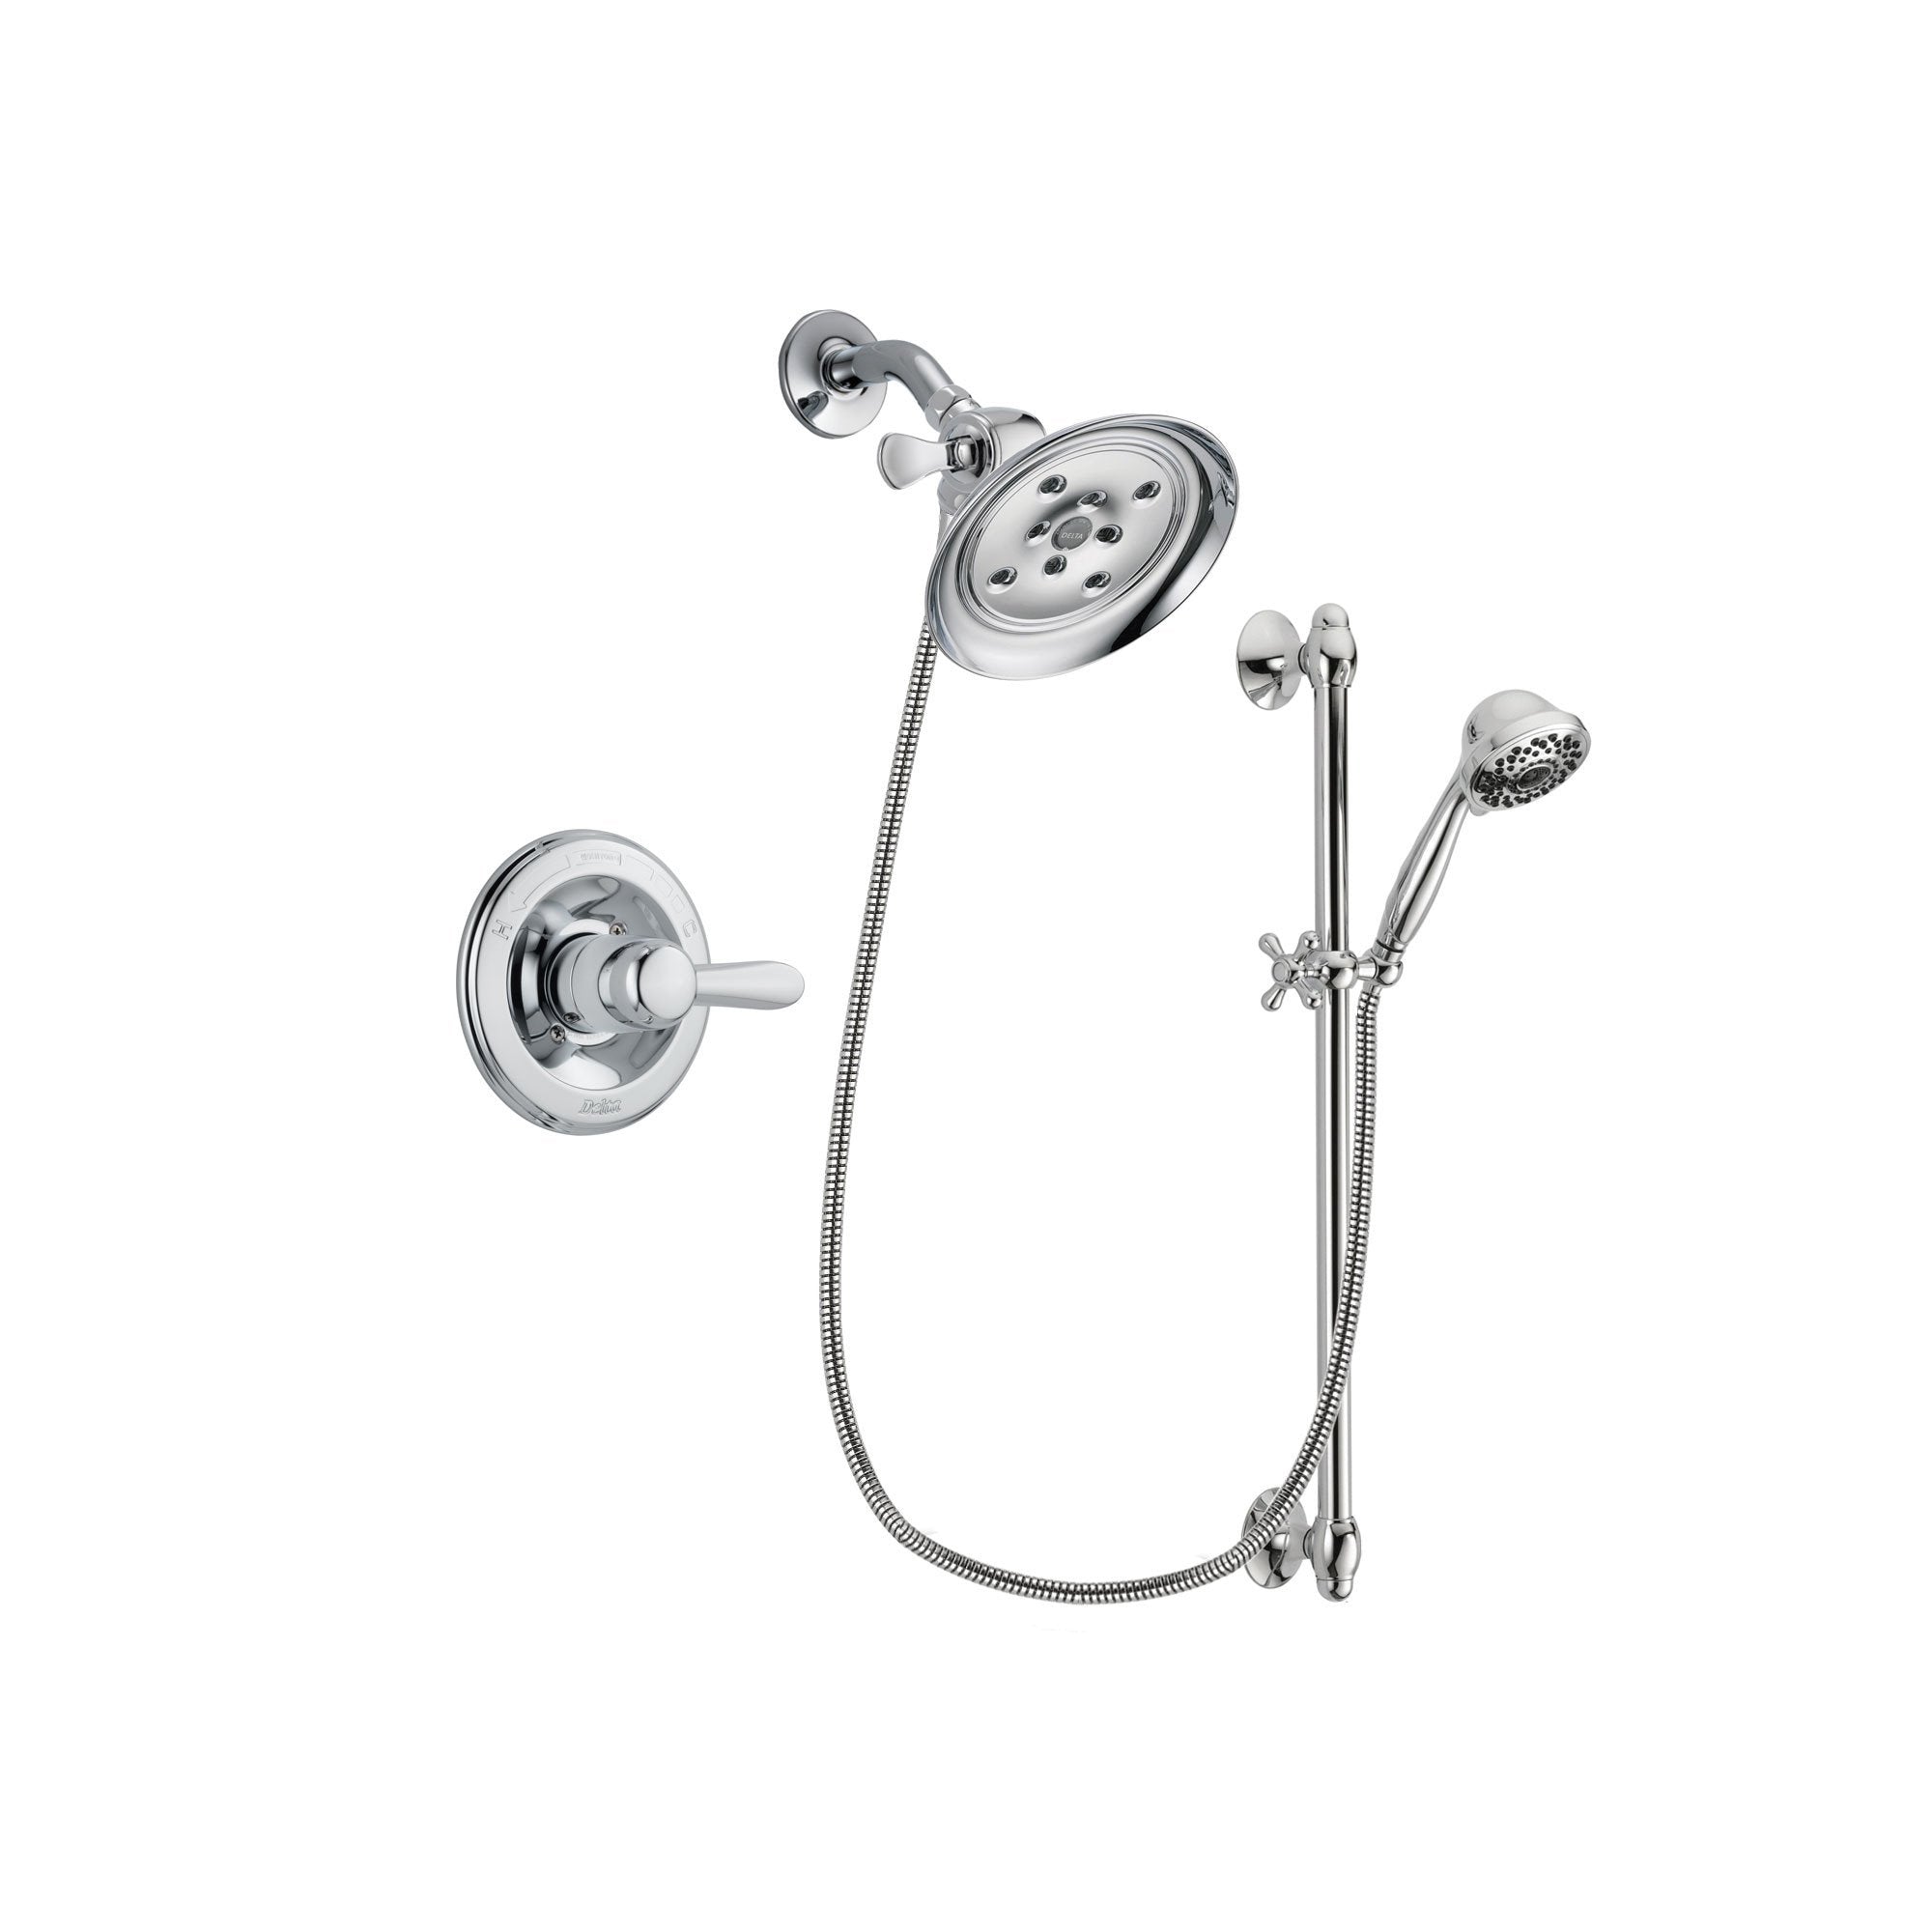 Delta Lahara Chrome Shower Faucet System w/ Shower Head and Hand Shower DSP0640V